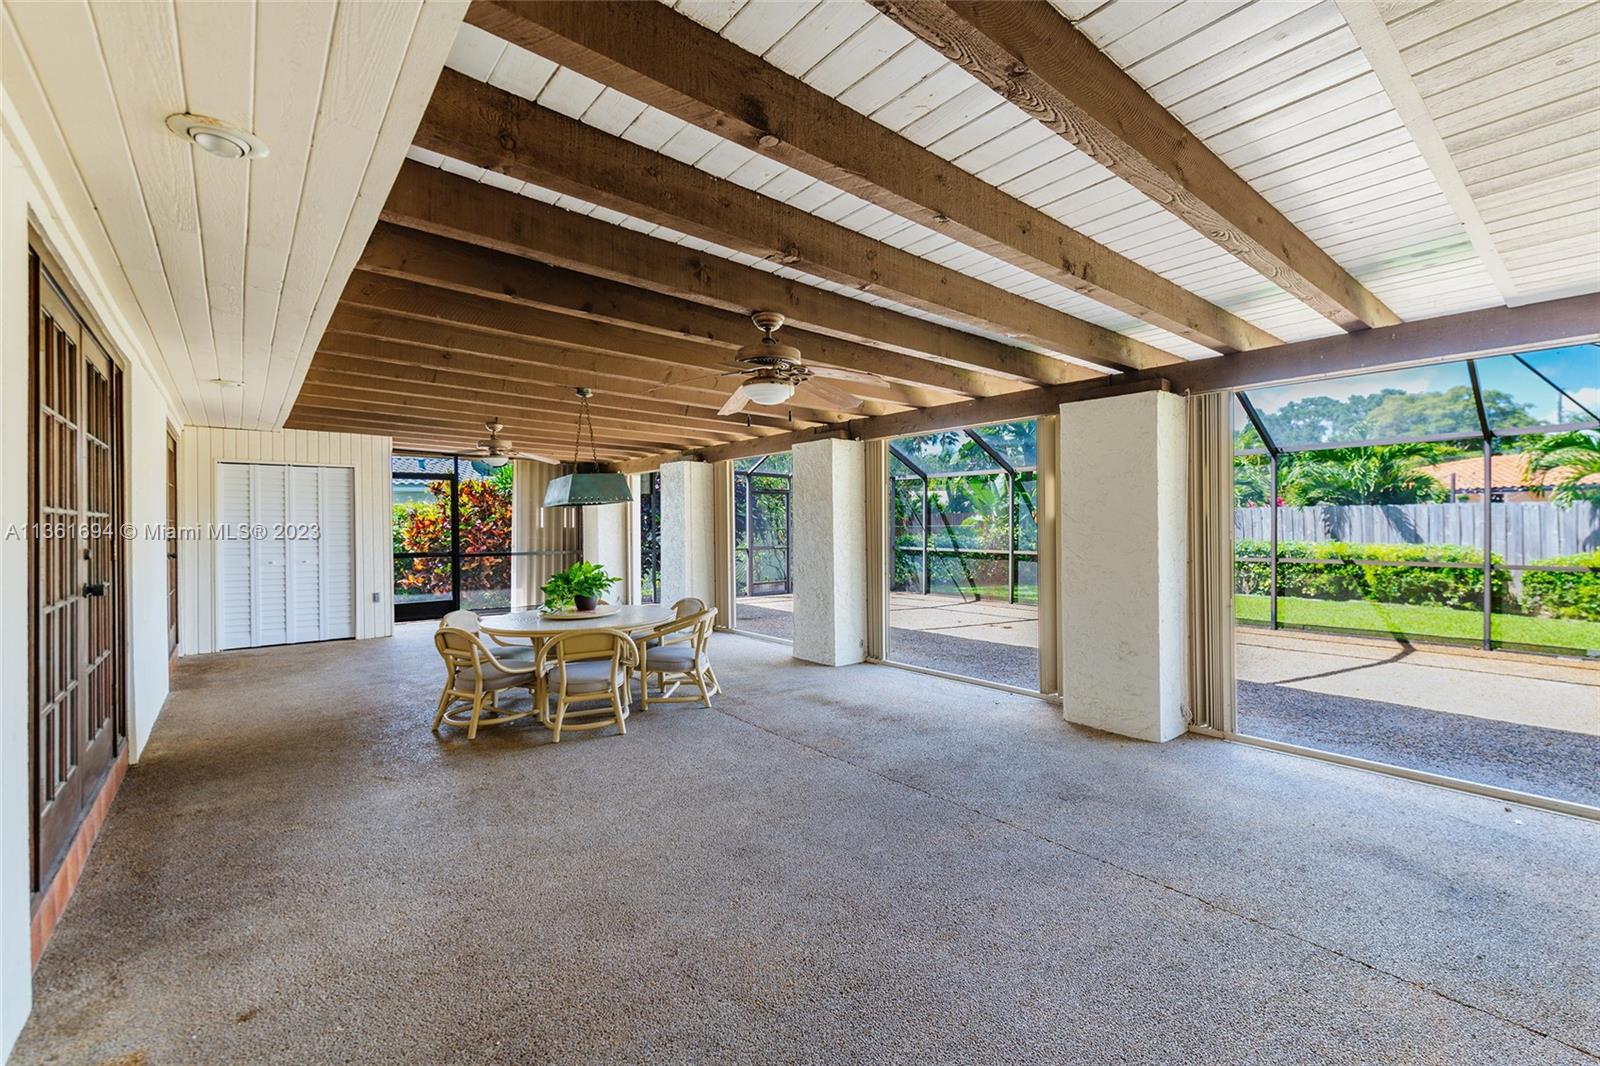 Large covered patio with accordion shutter protection.